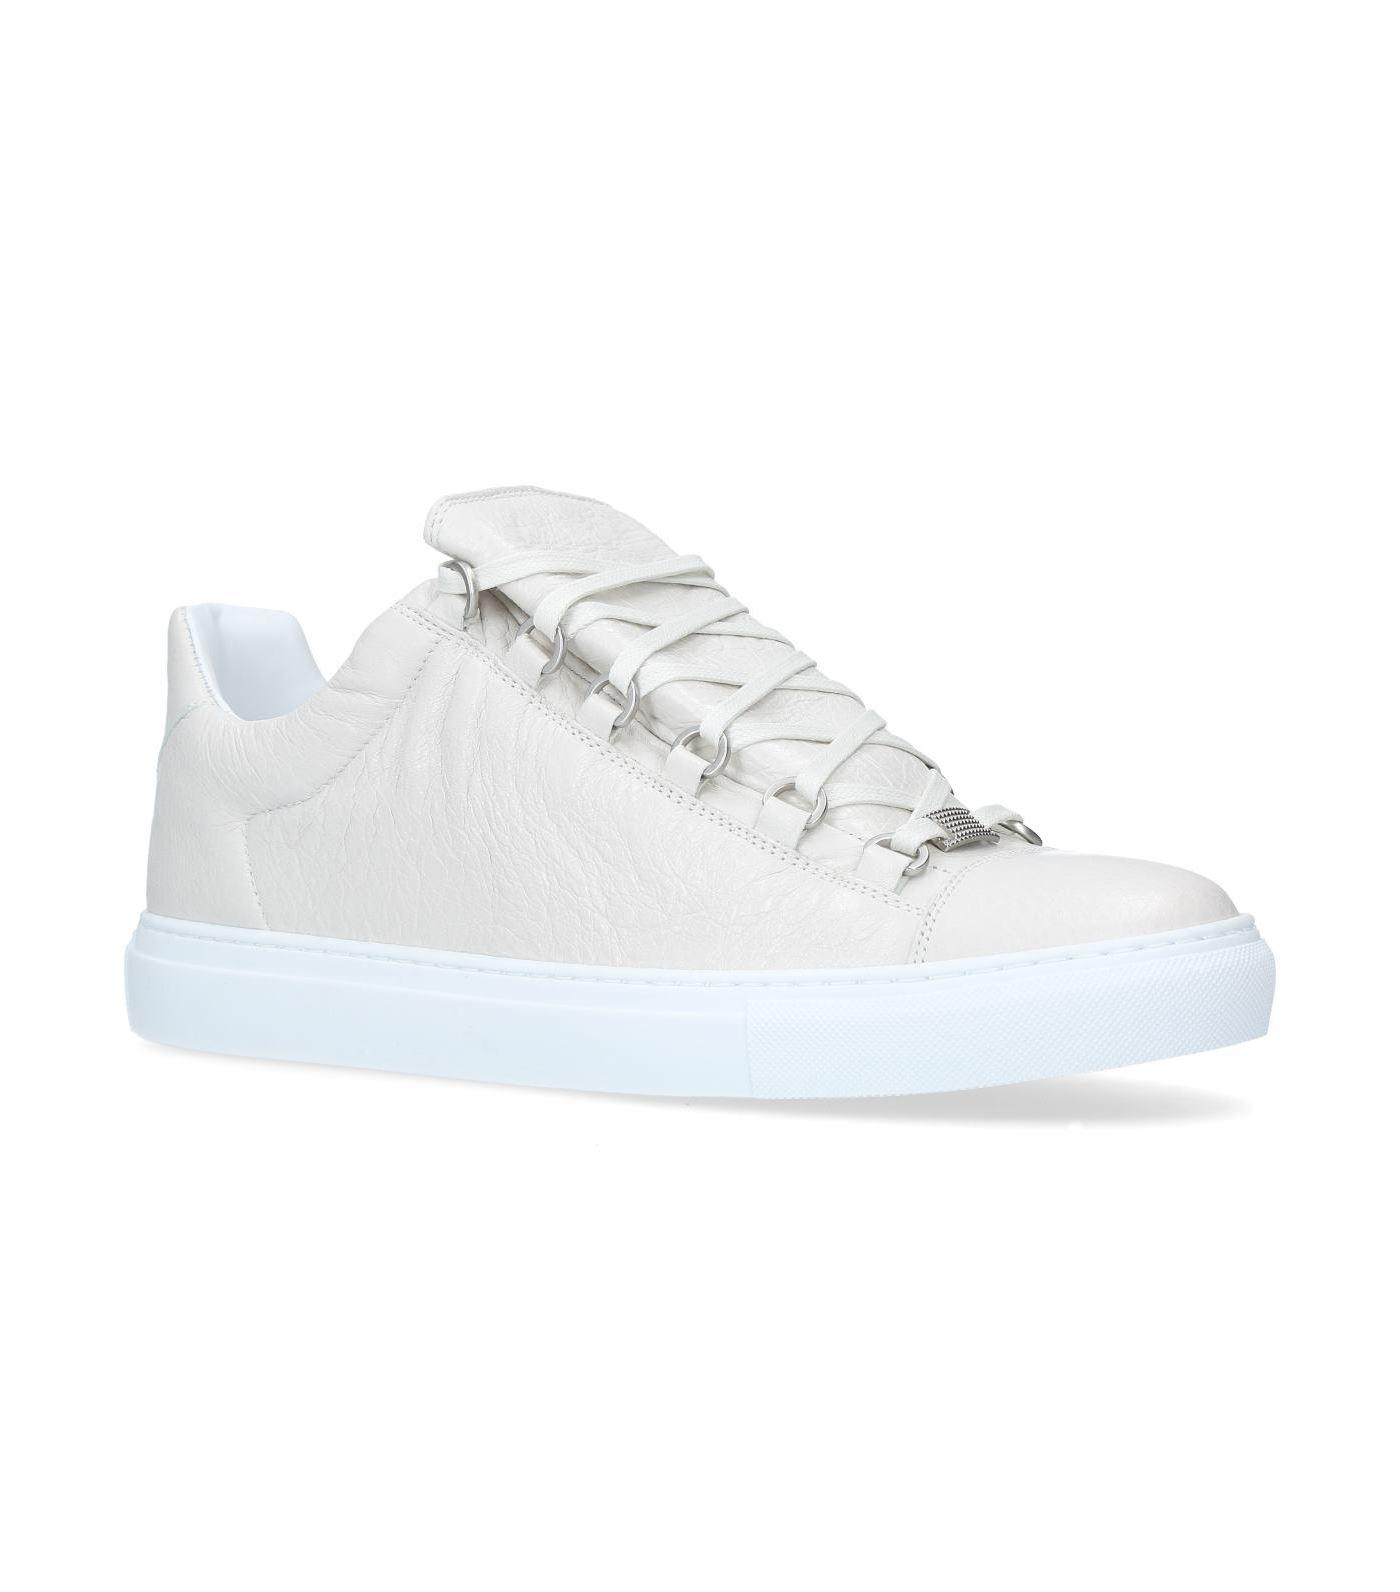 Balenciaga Leather Arena Low-top Sneakers in White for Men - Lyst